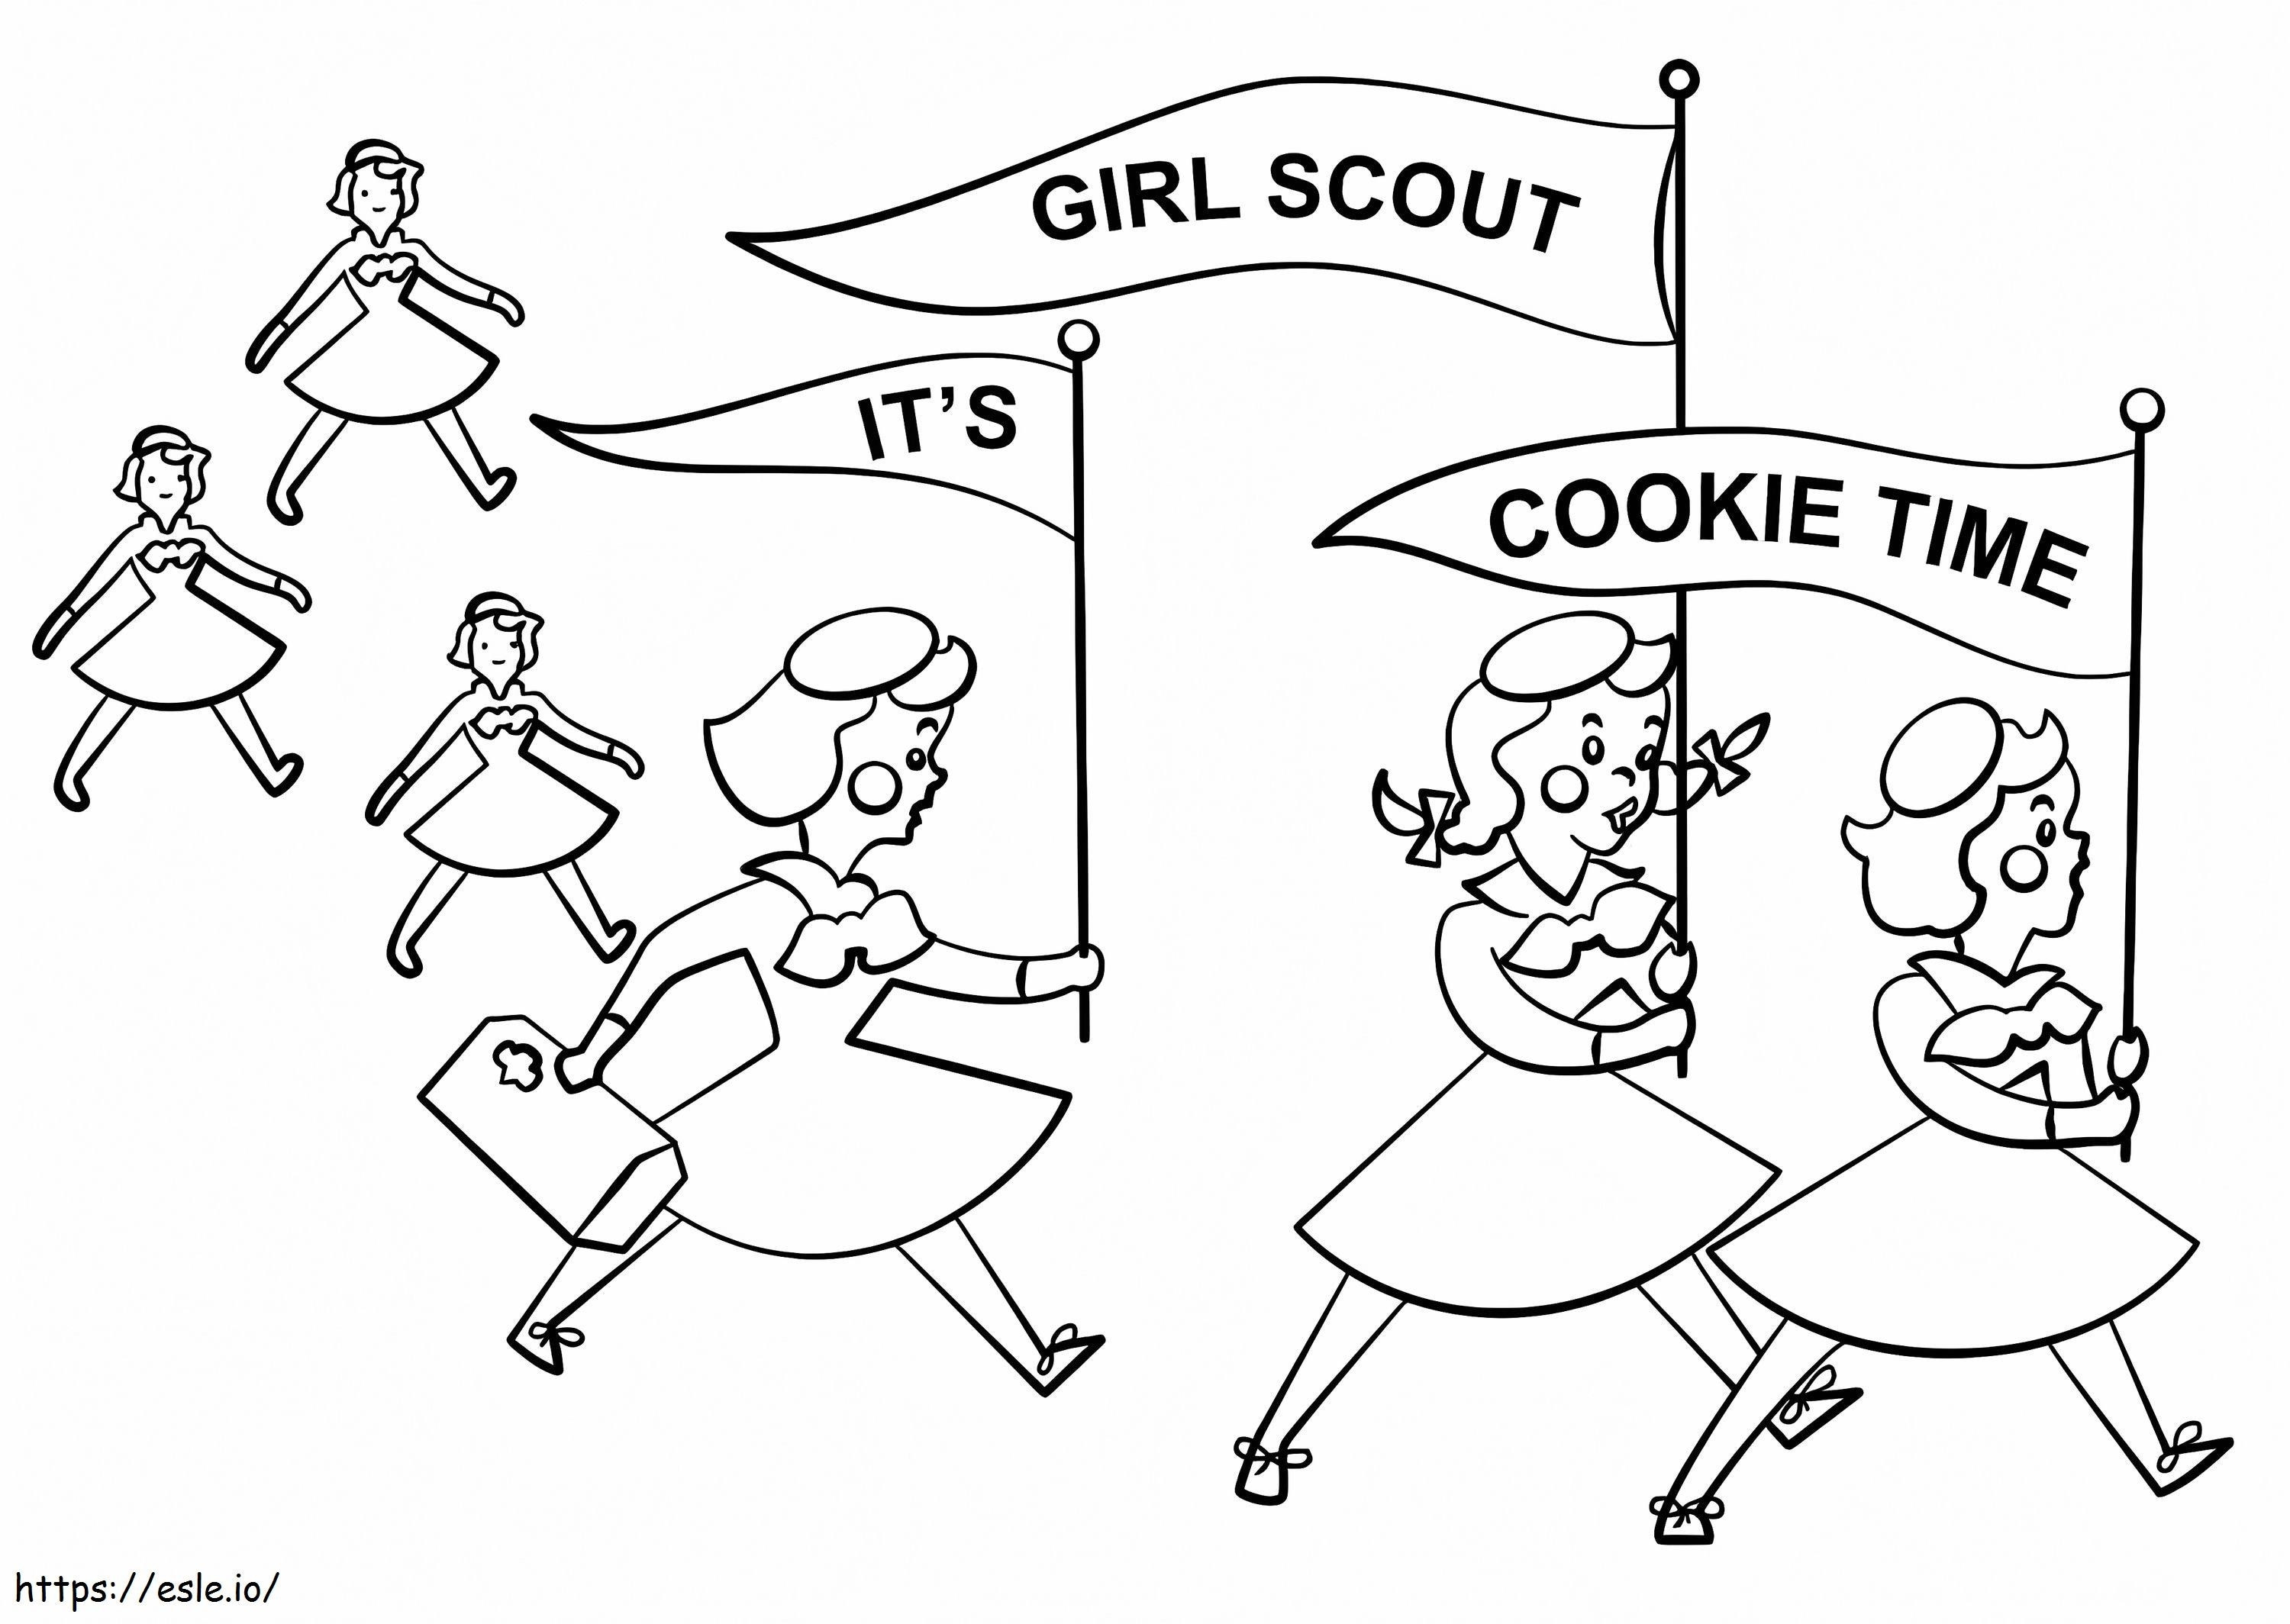 Girl Scout Cookie Time coloring page